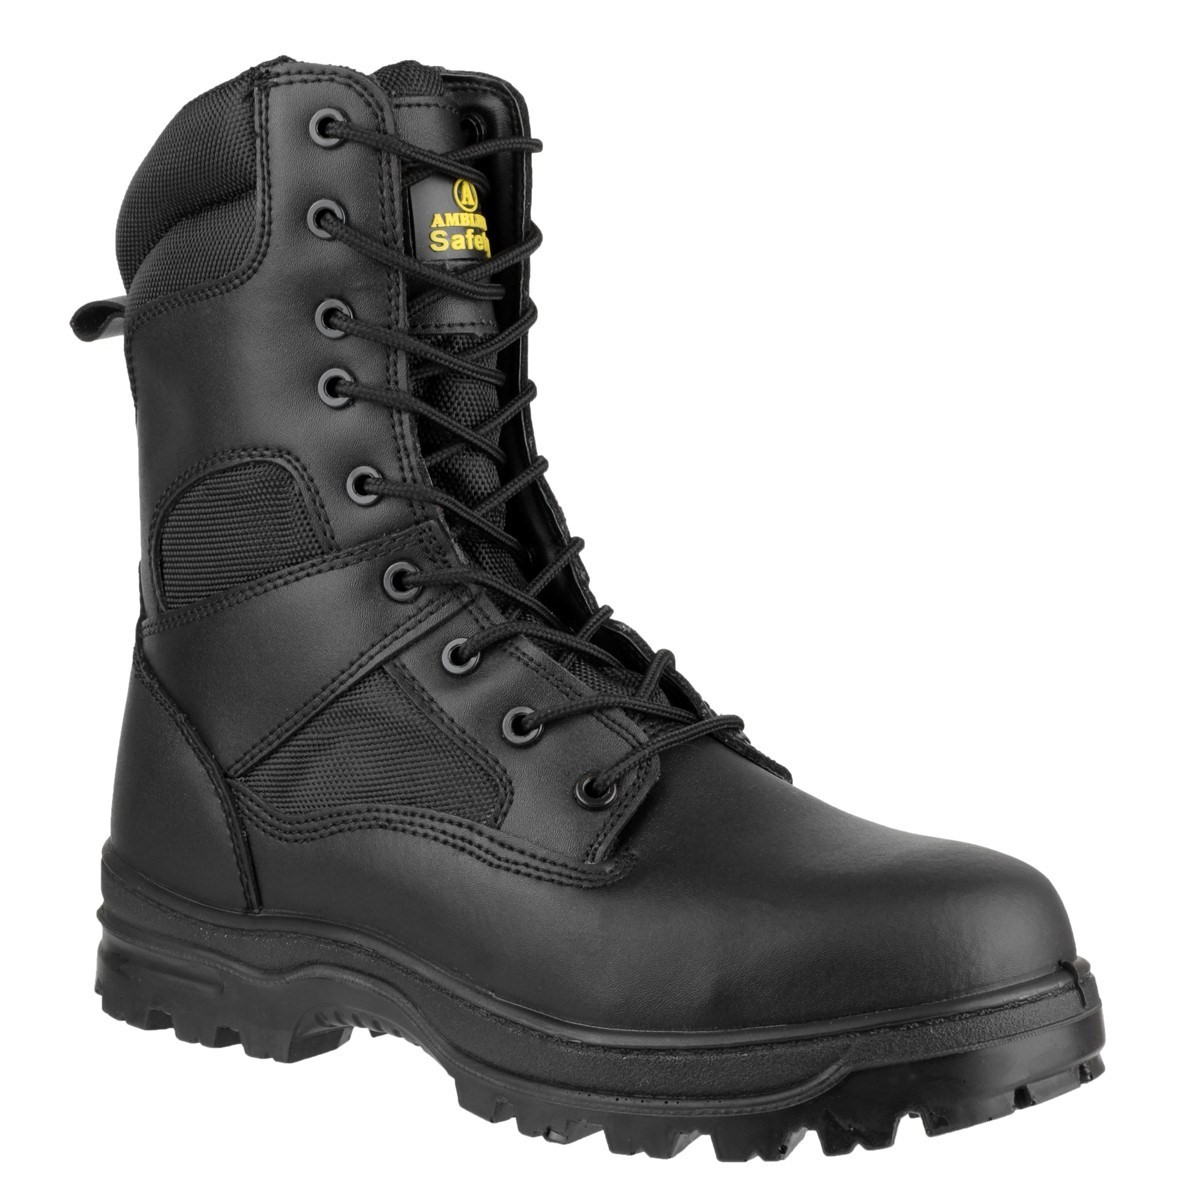 FS009C Water Resistant Hi-leg Lace up Safety Boot